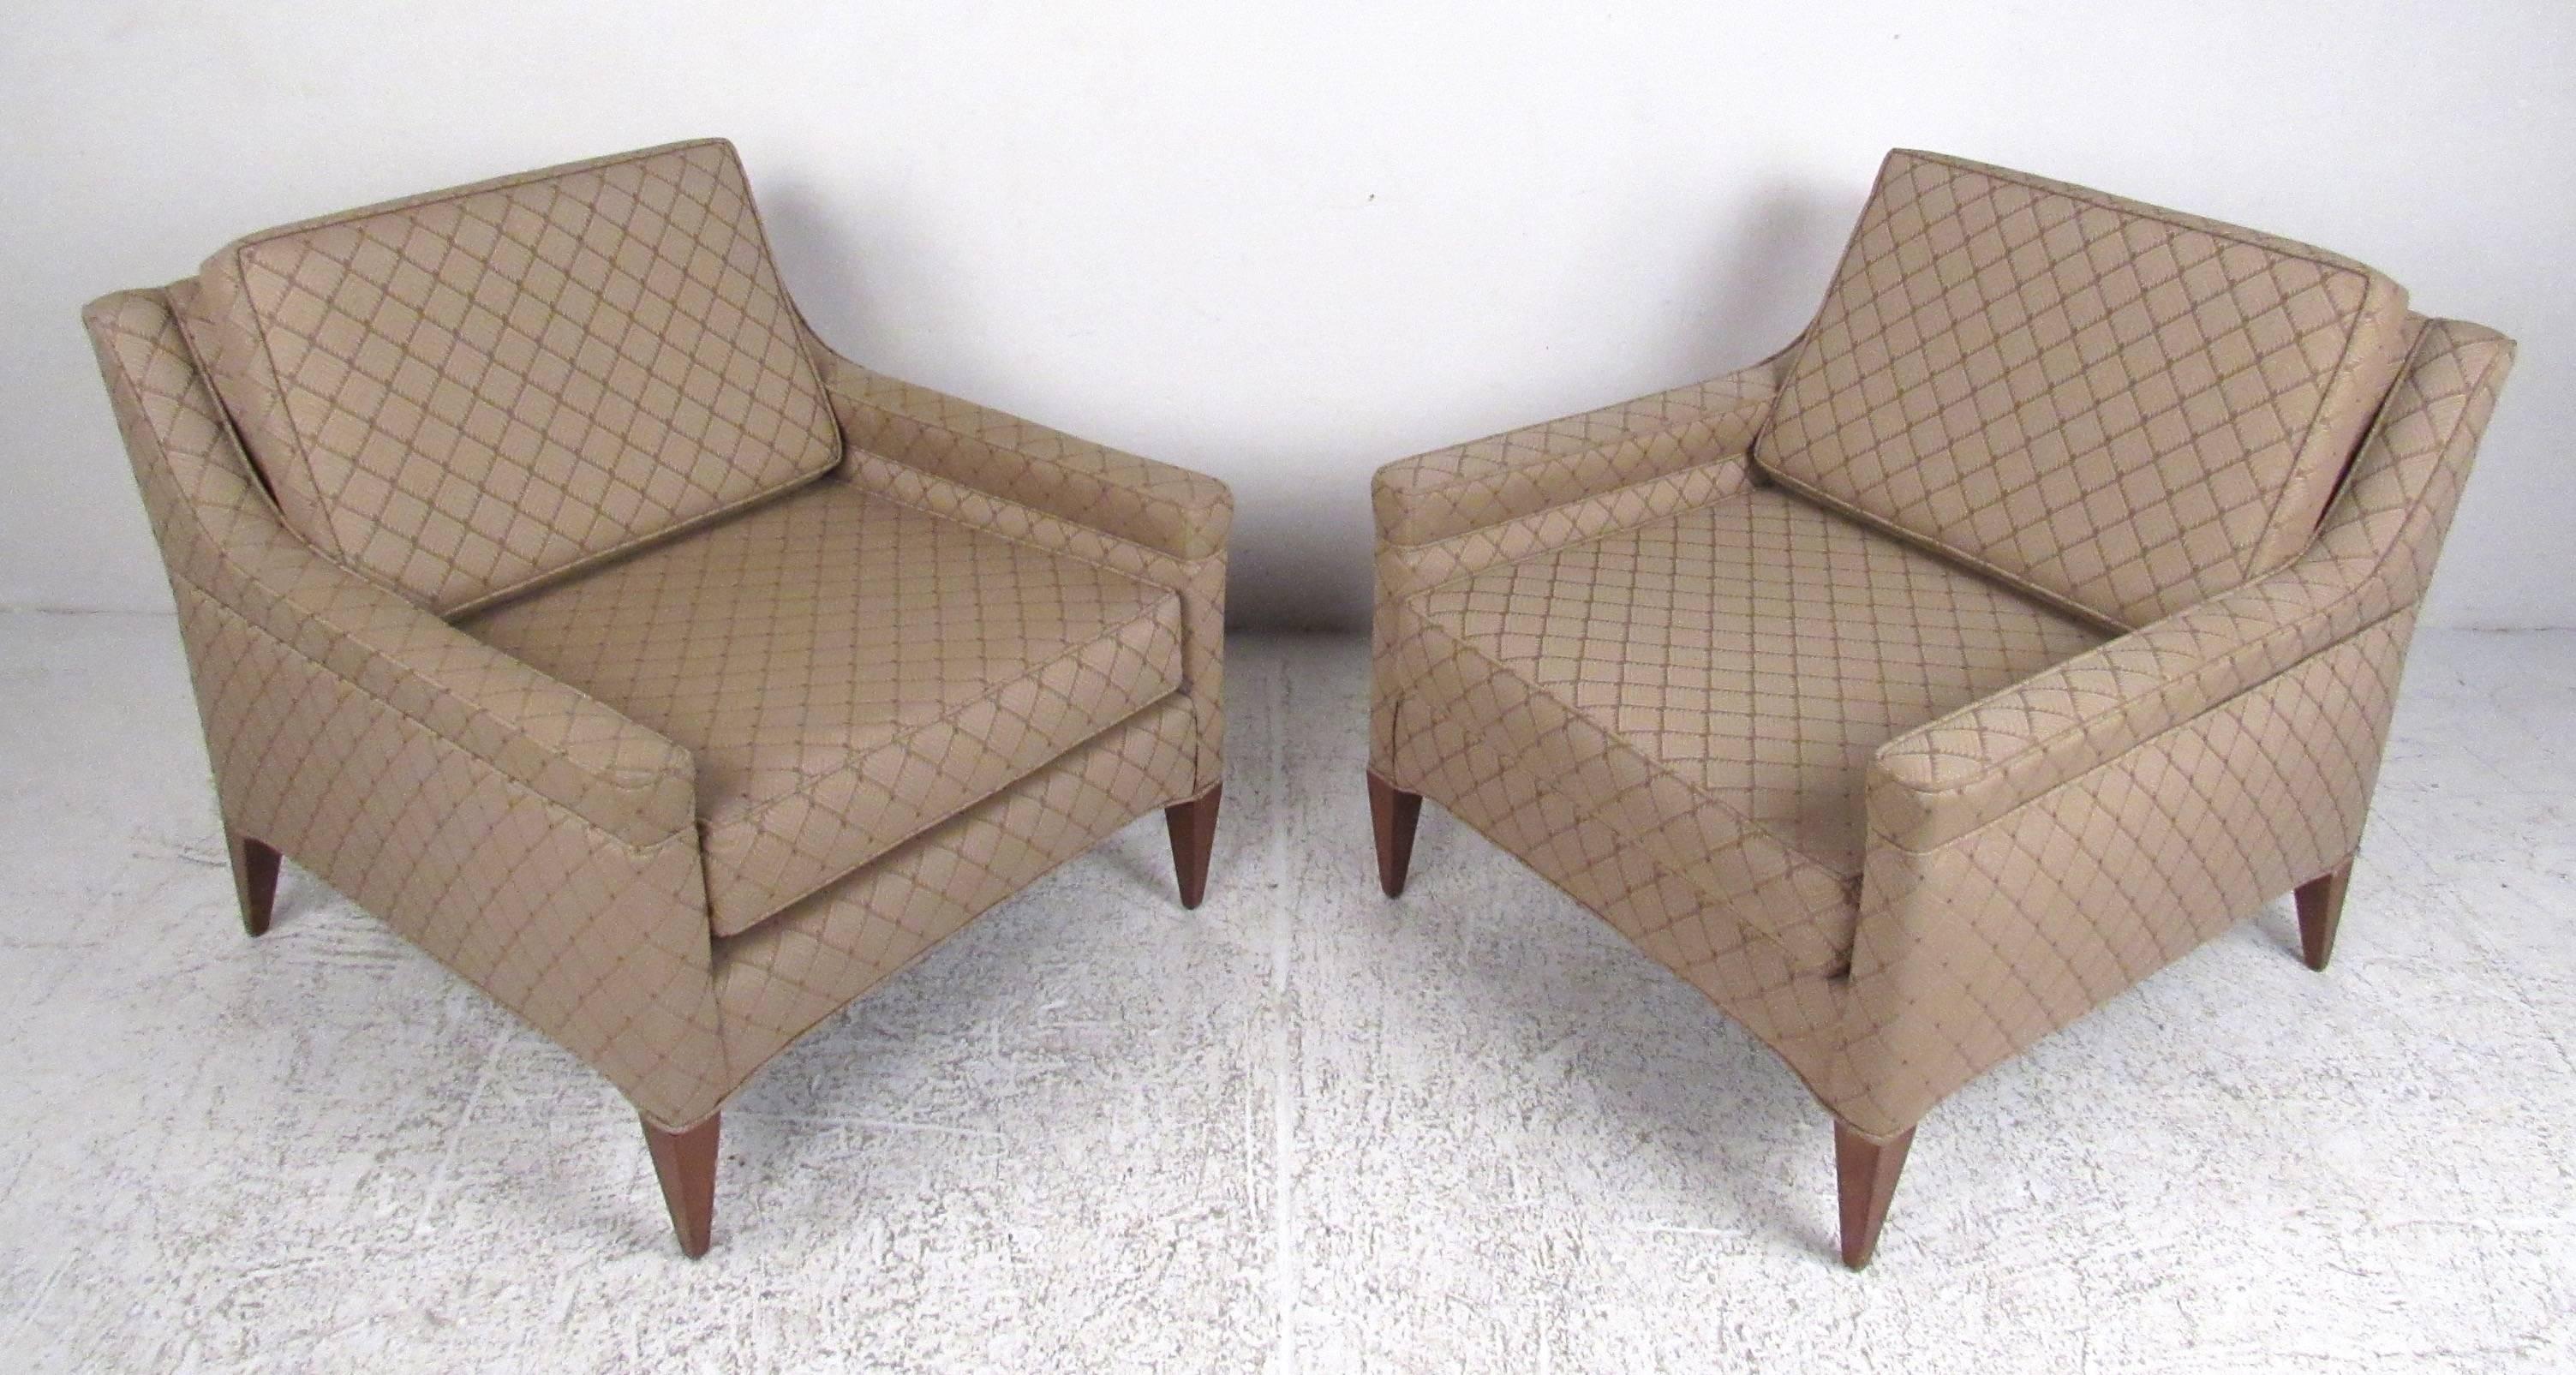 Nice pair of sloped arm lounge chairs attributed to Edward Wormley for Dunbar. Very comfortable with a lower profile and a wide, deep seat. Original metal Dunbar tag attached. Please confirm item location (NY or NJ) with dealer.